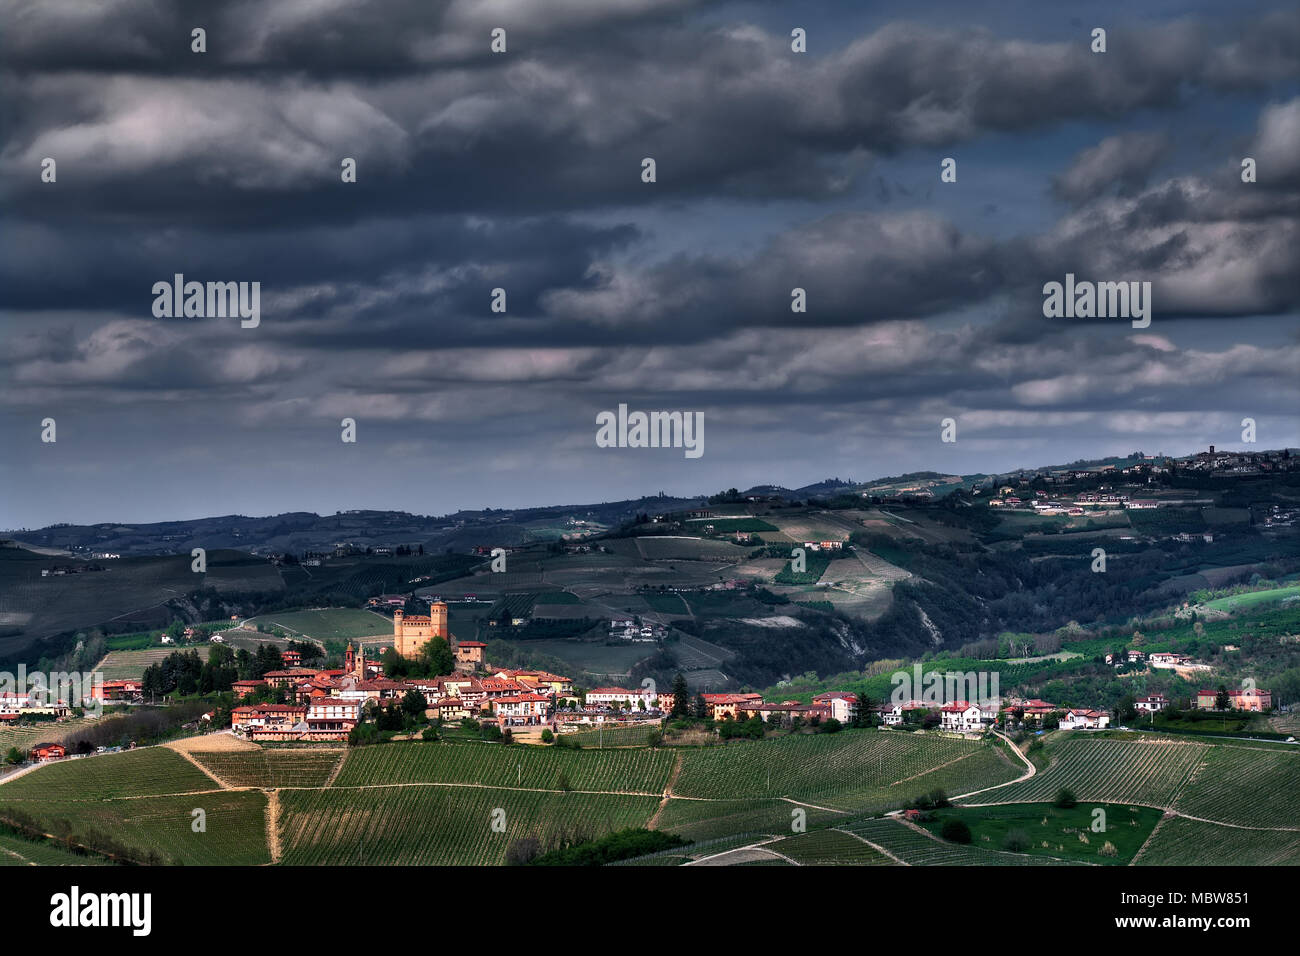 Wide view of the hills and vineyards of the Langhe, under a stormy sky, while a ray of sunshine illuminates Serralunga d'Alba and its towering castle. Stock Photo